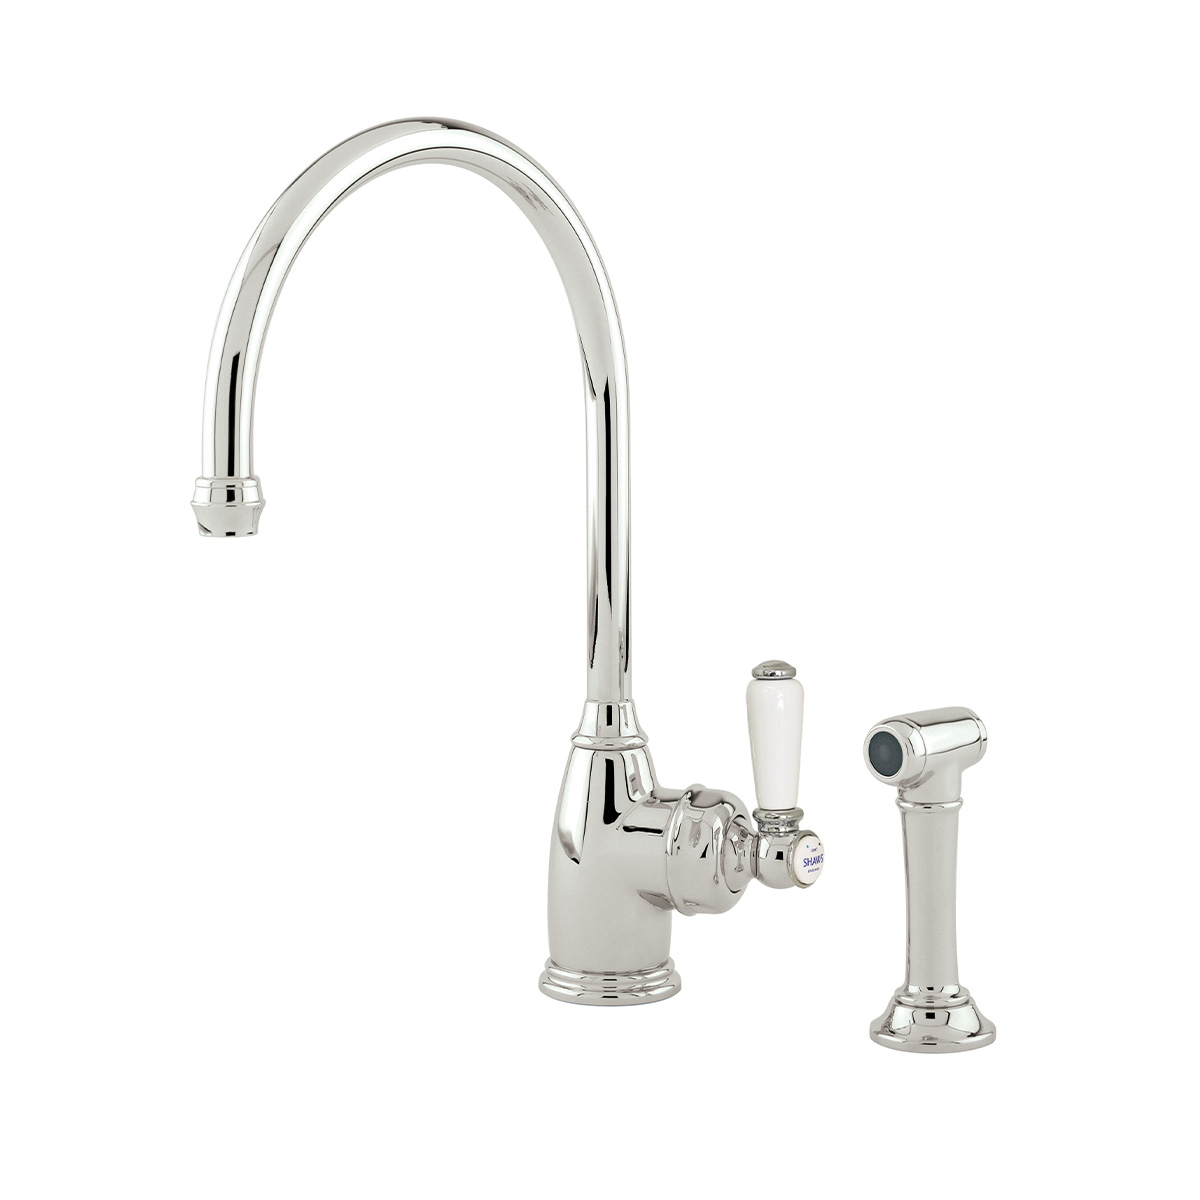 Shaws by Perrin & Rowe Yarrow kitchen mixer with spray rinse in Nickel. Parthian style monobloc kitchen tap AUSH.4346. Distributed in Australia by Luxe by Design, Brisbane.